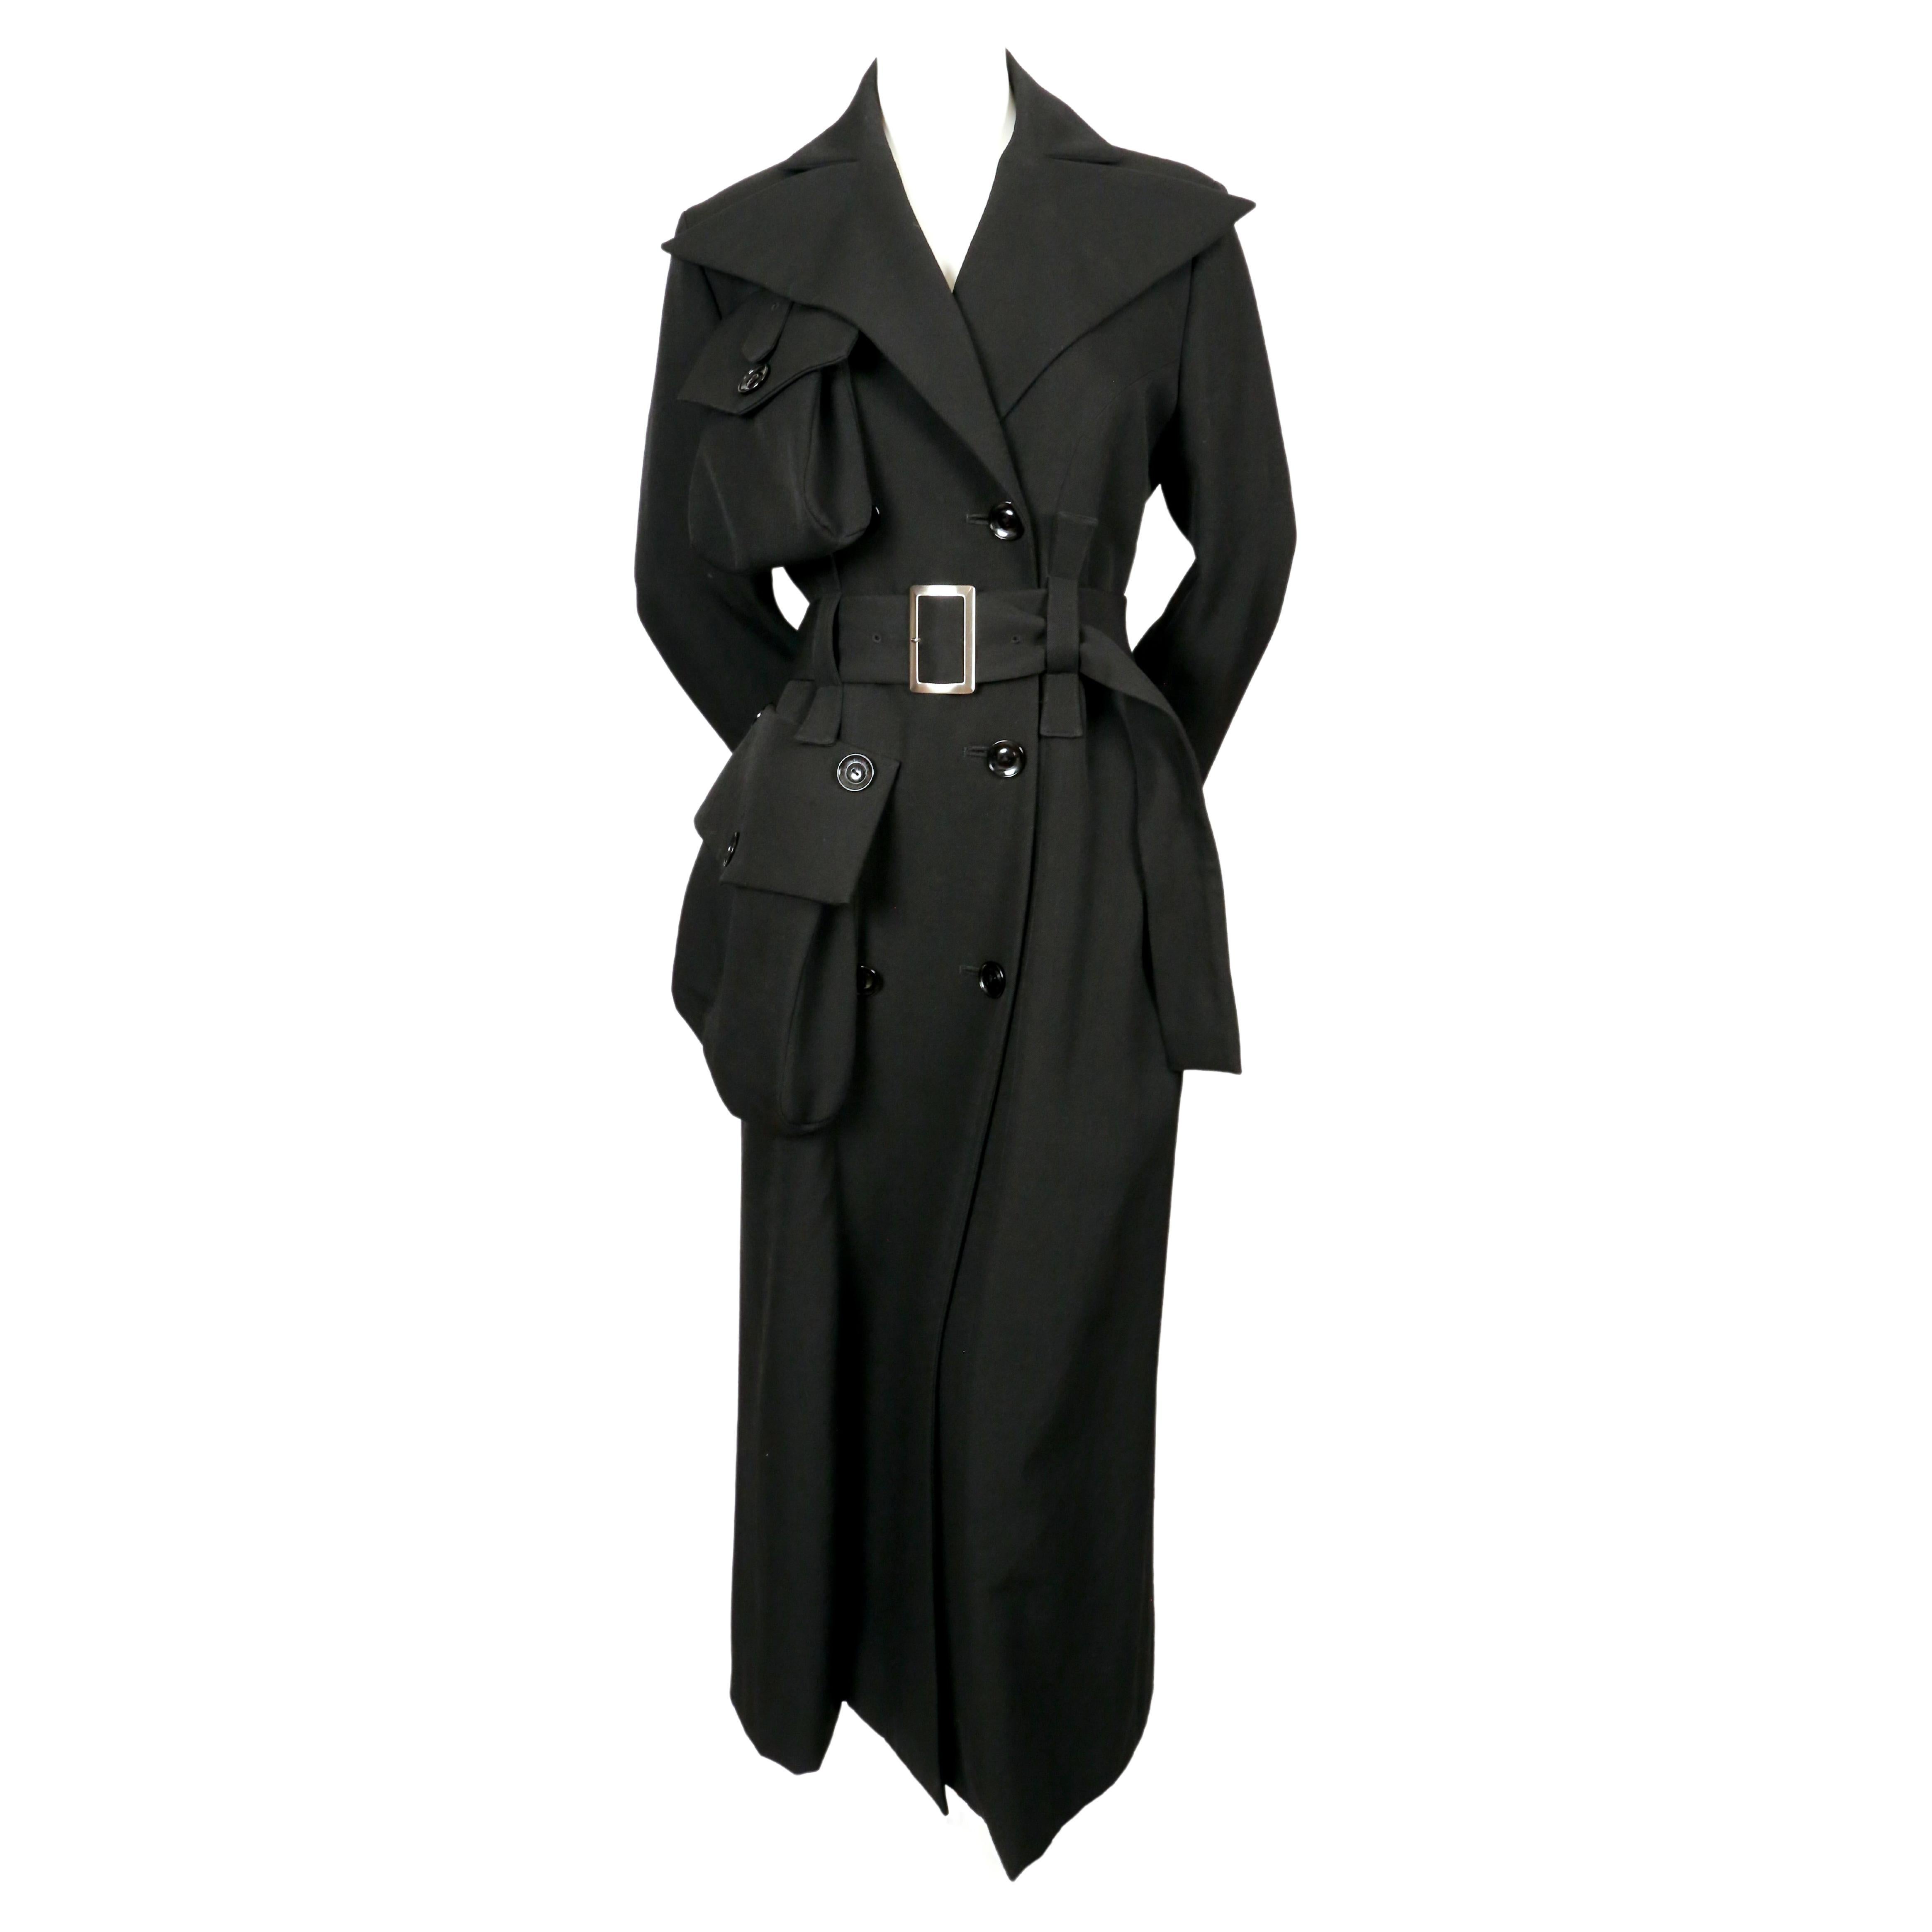 Very unique, long black wool coat with three-dimension sack 'pocket' details designed by Yohji Yamamoto exactly as seen on the fall 2004 runway. Coat has a really great silhouette with a very flattering fit. It is a very rare find. Coat is labeled a